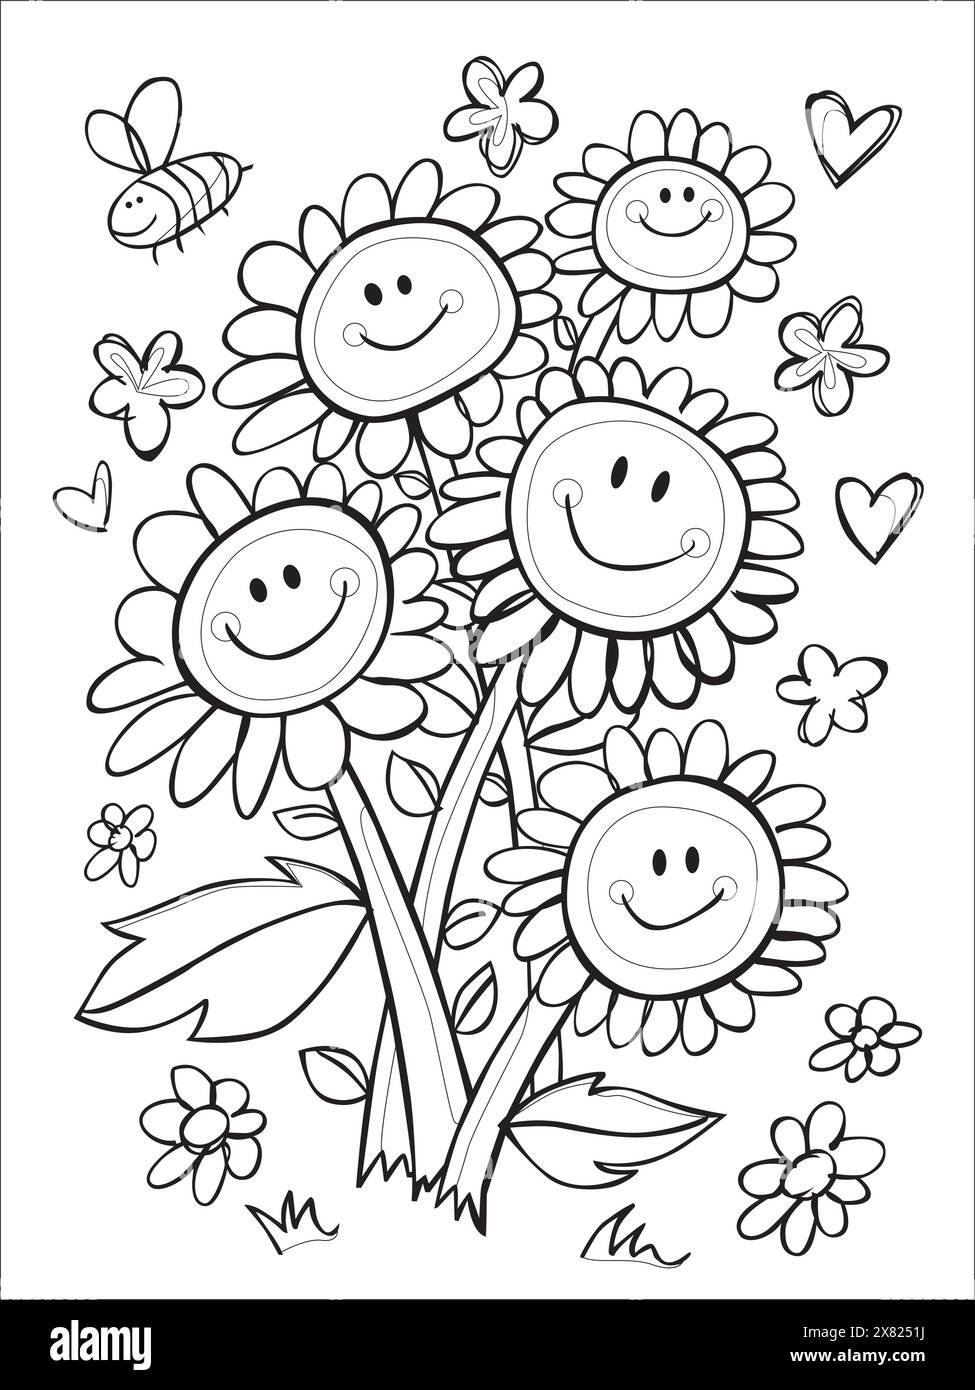 Vector black and white coloring sheet with hand drawn smiley face flower bouquet illustration with hearts and curvy stars. Suitable kids coloring Stock Vector